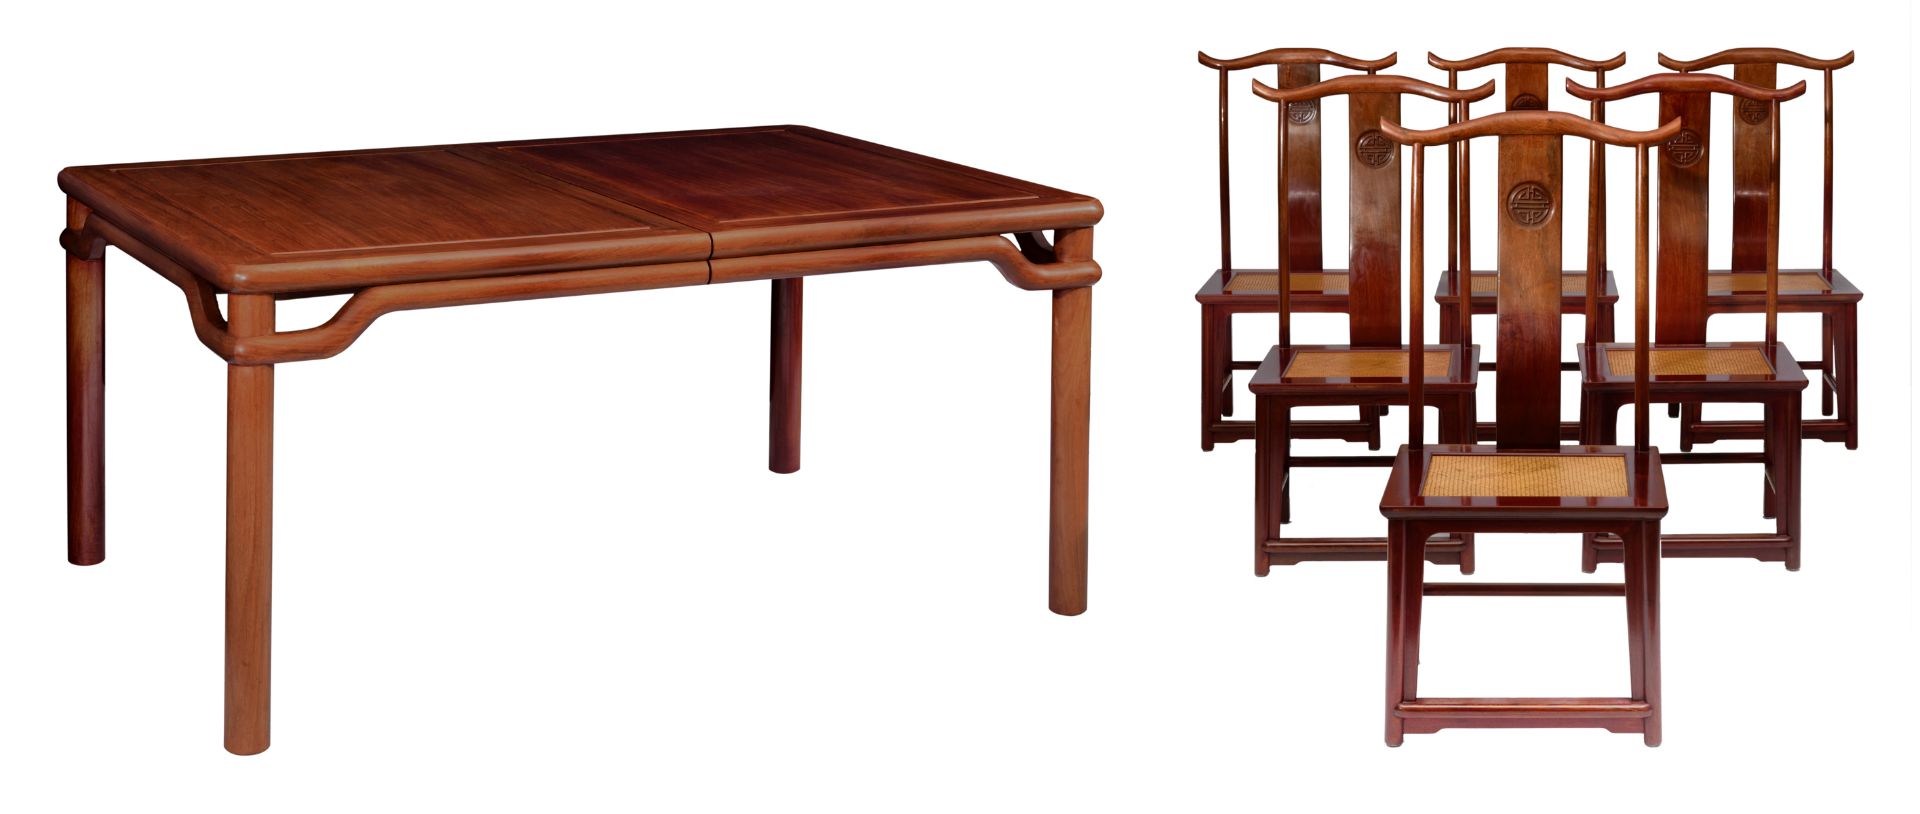 A large Chinese mahogany extendable dining table, with a set of six chairs, H 76 - W 209 - D 109 cm